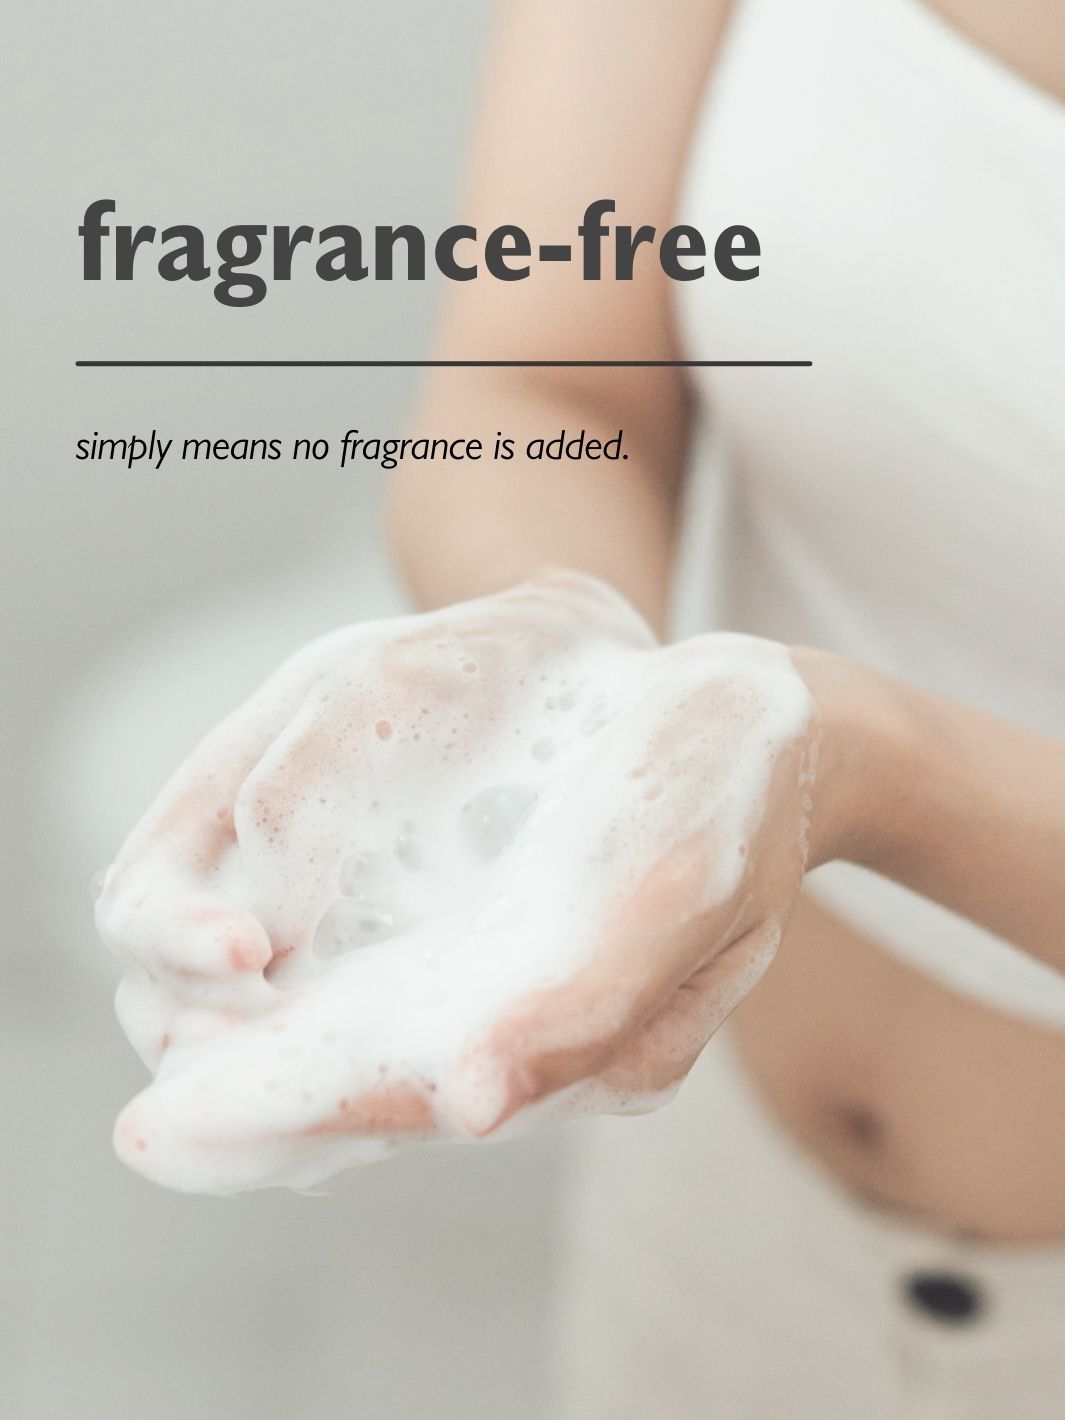 Why You Should Say No! to Fragrance